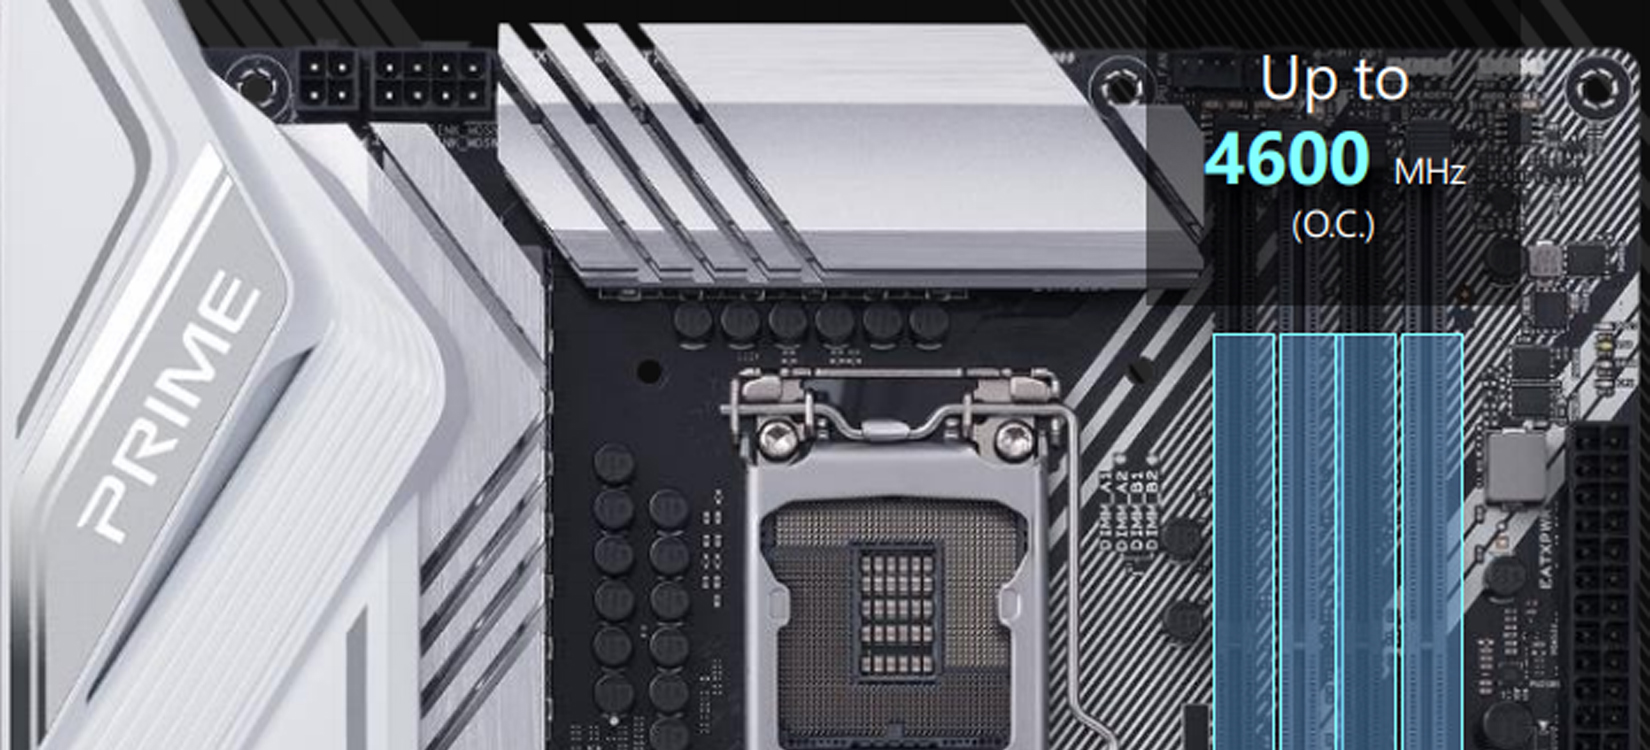 Mainboard ASUS PRIME Z490-A giá tốt